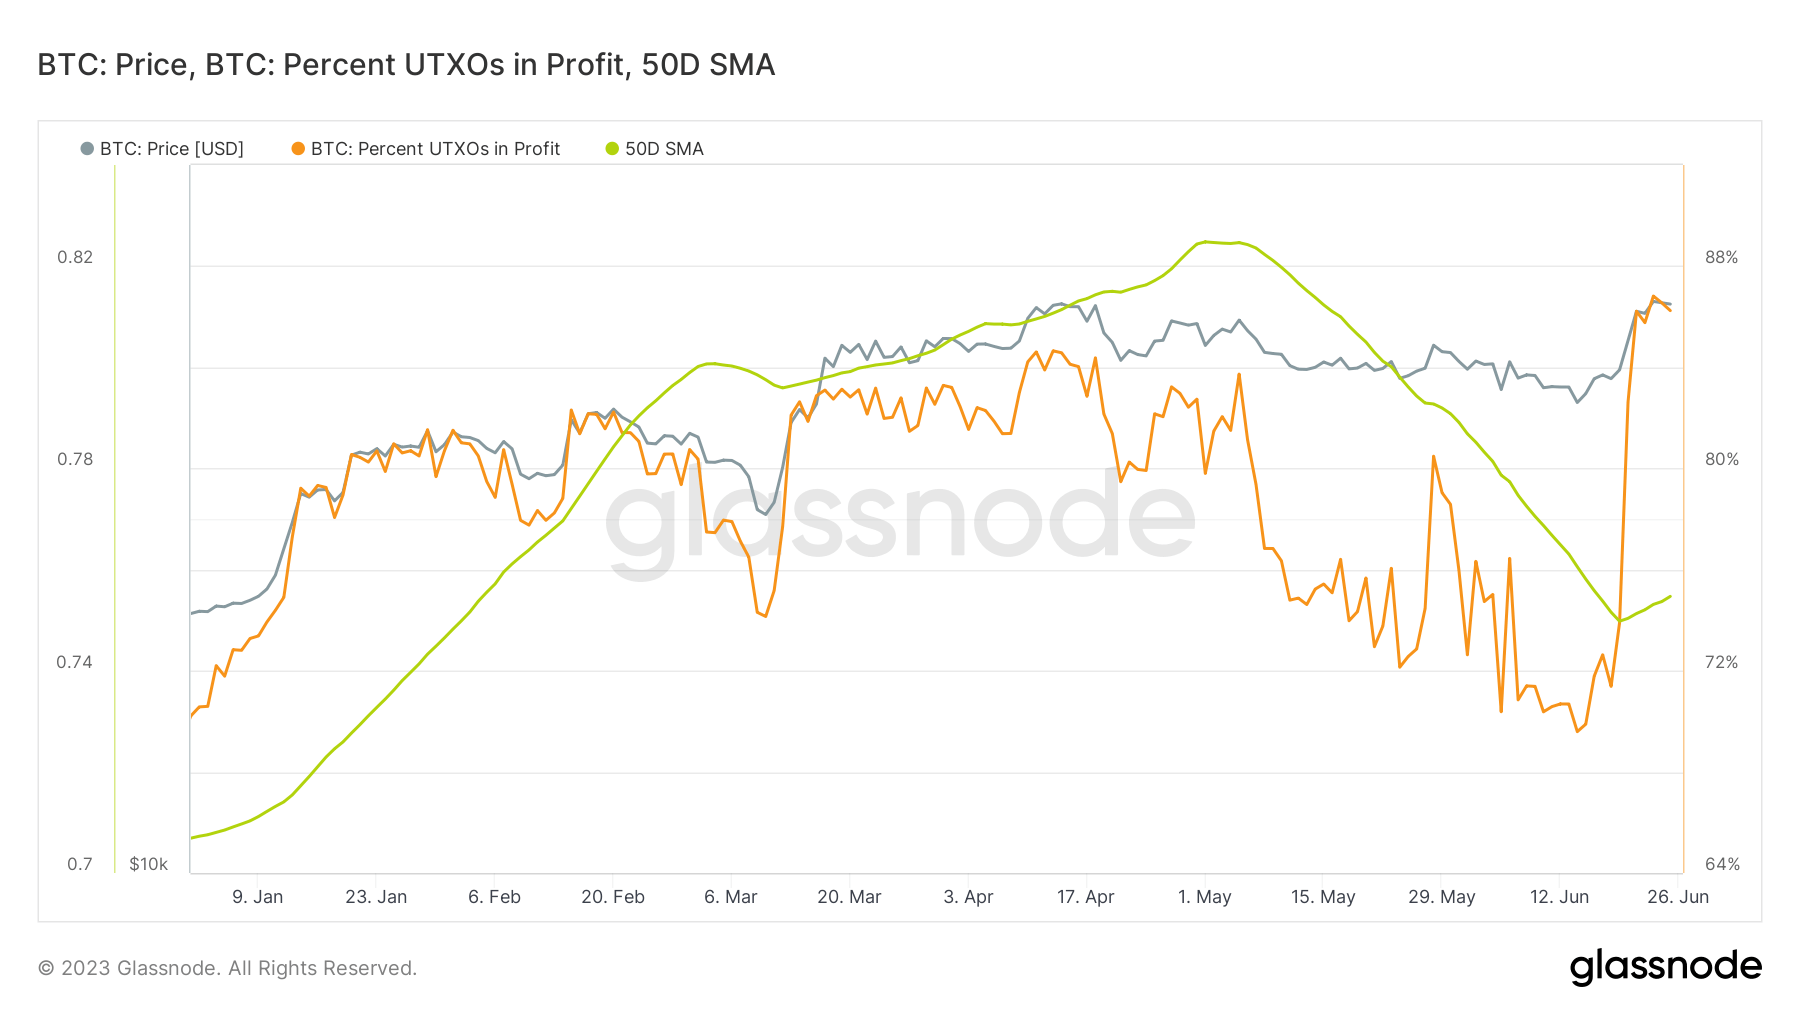 utxos has been profitable since the beginning of the year